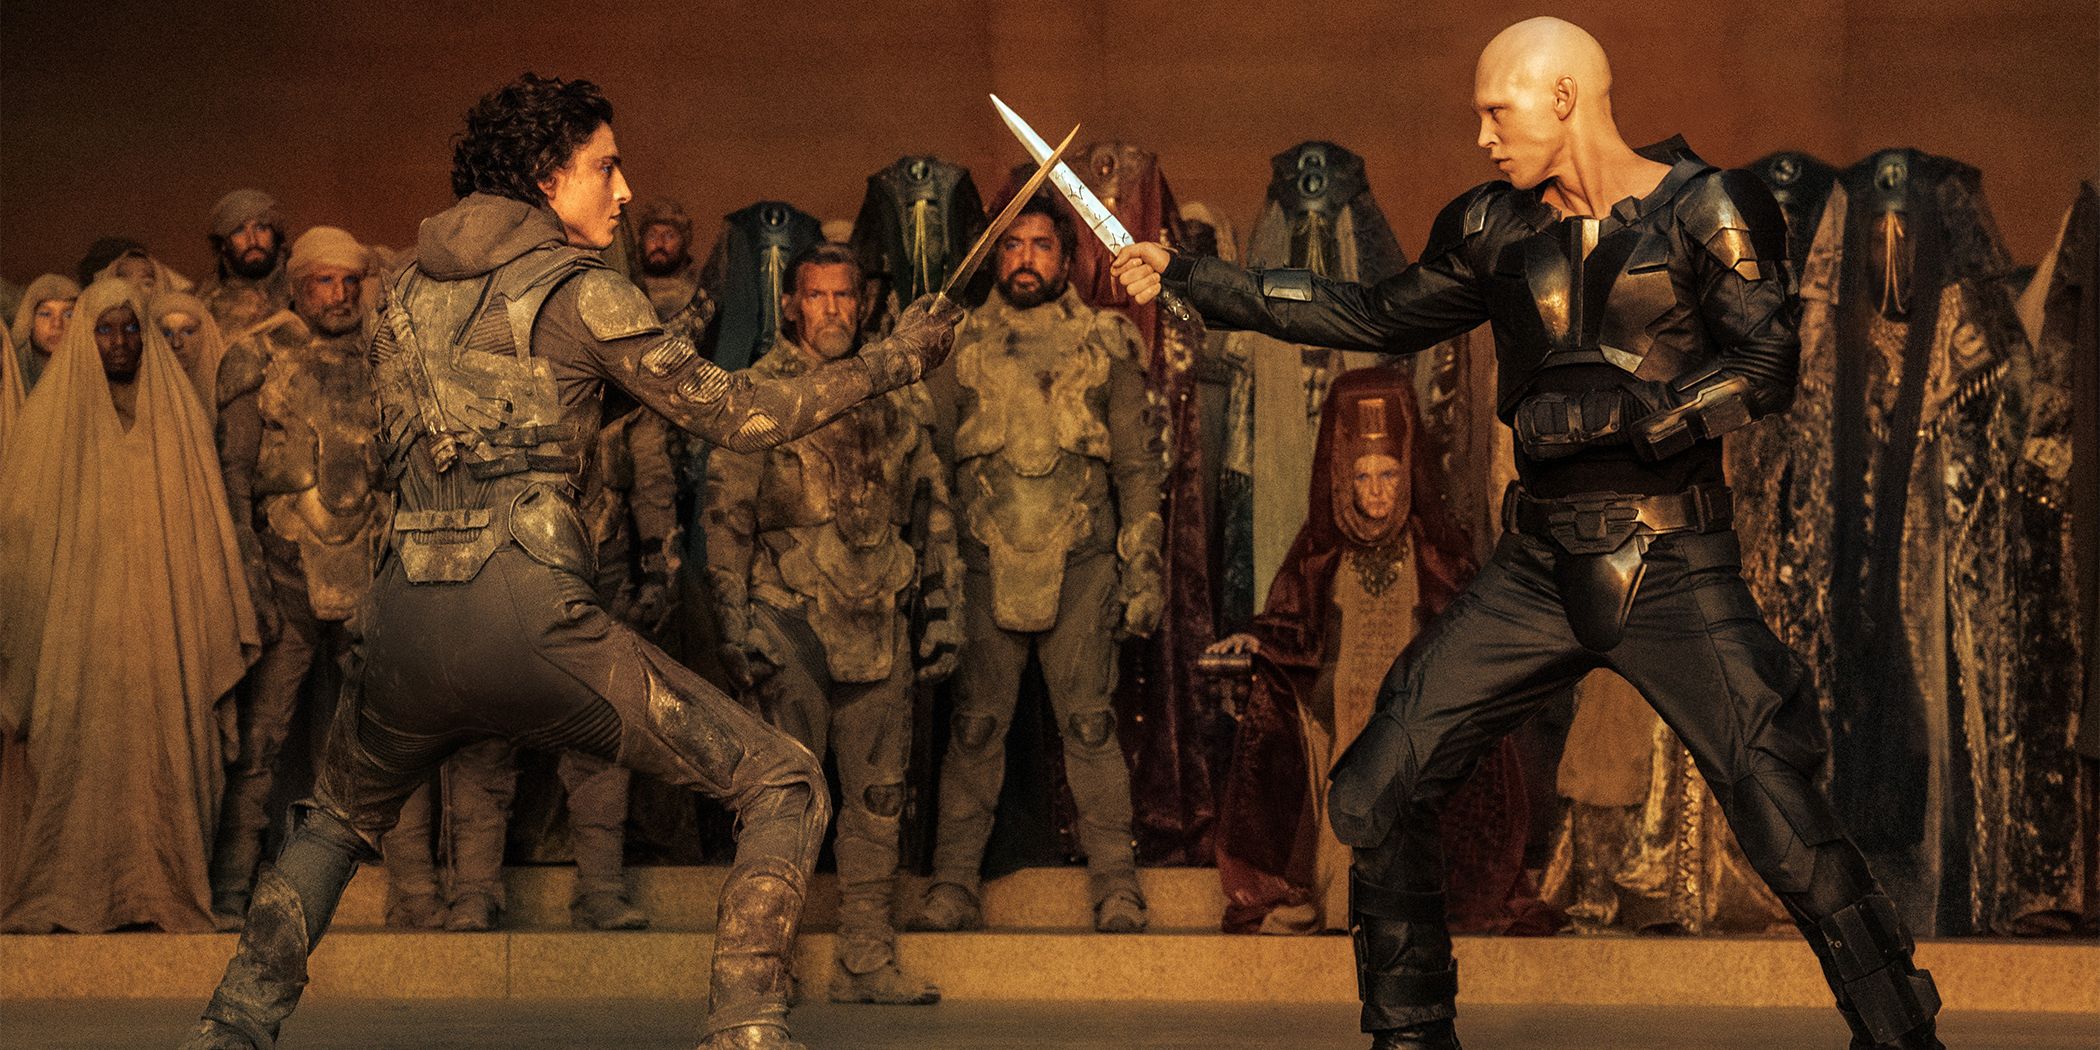 Timothee Chalamet as Paul Atriedes and Austin Butler as Feyd-Rautha sword fighting in Dune: Part Two